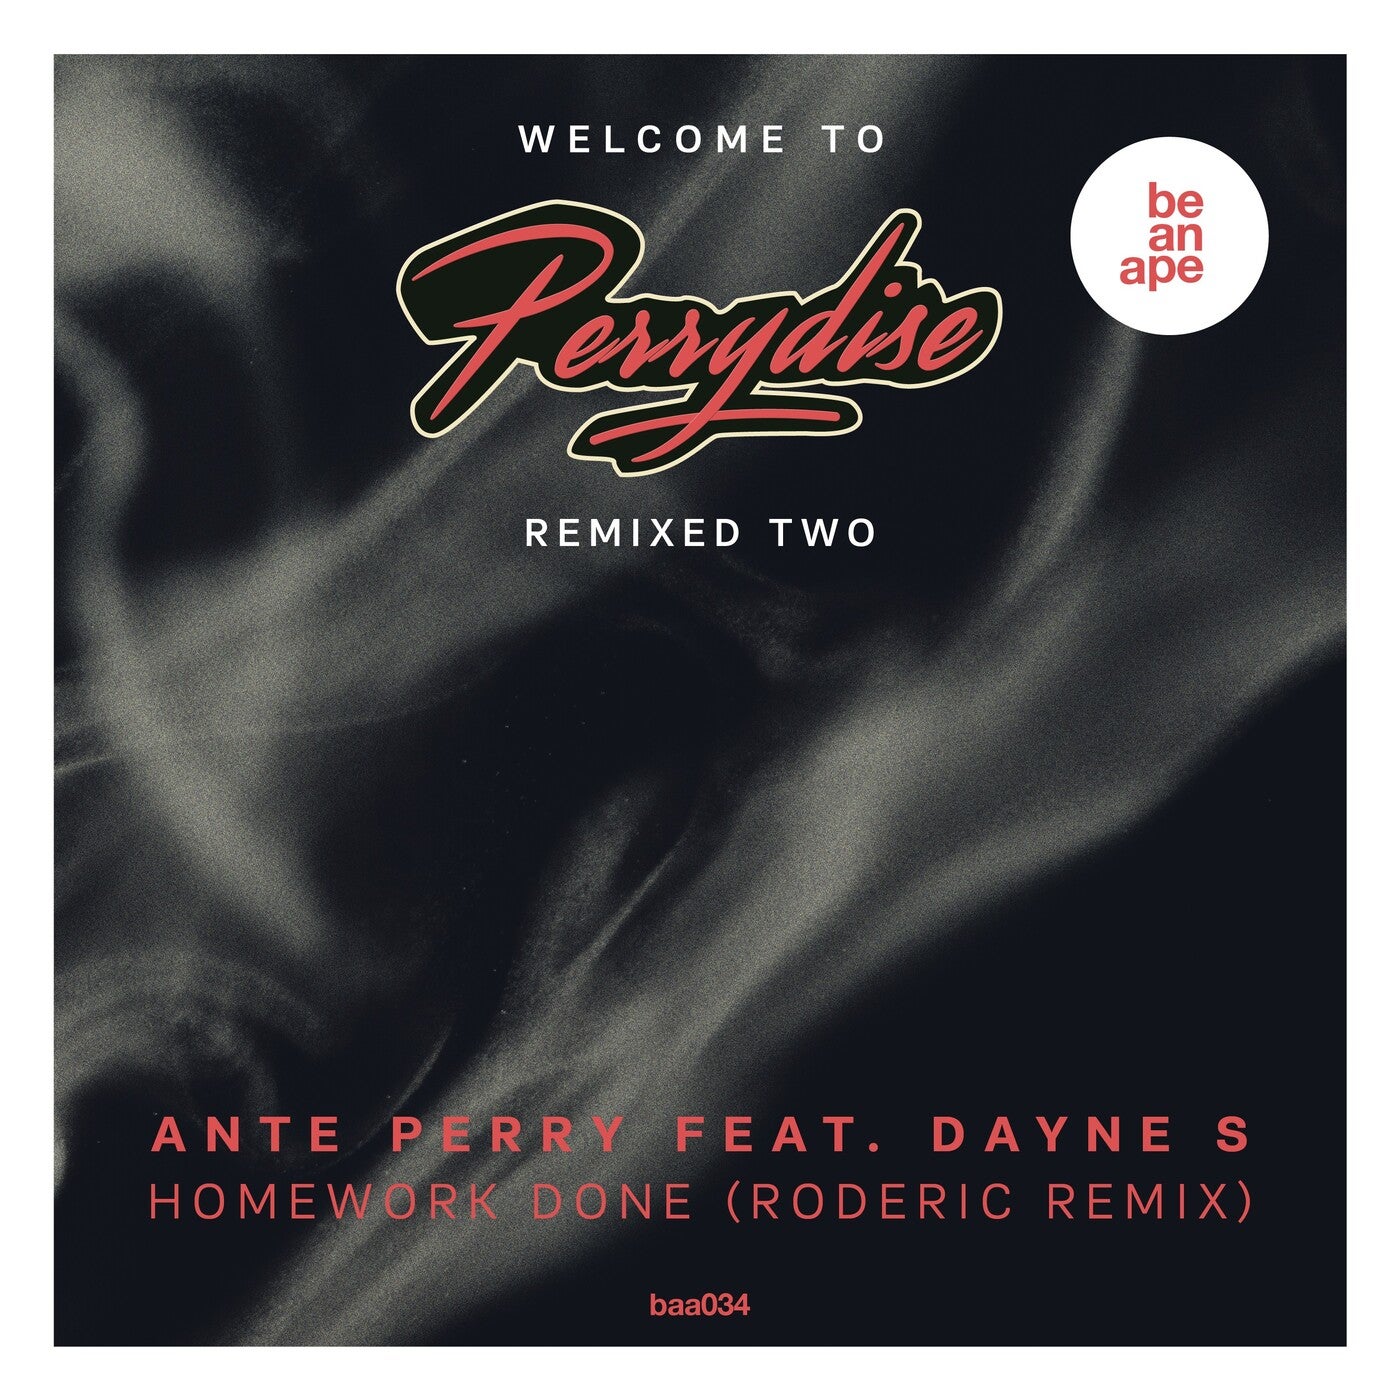 Download Welcome to Perrydise Remixed Two on Electrobuzz